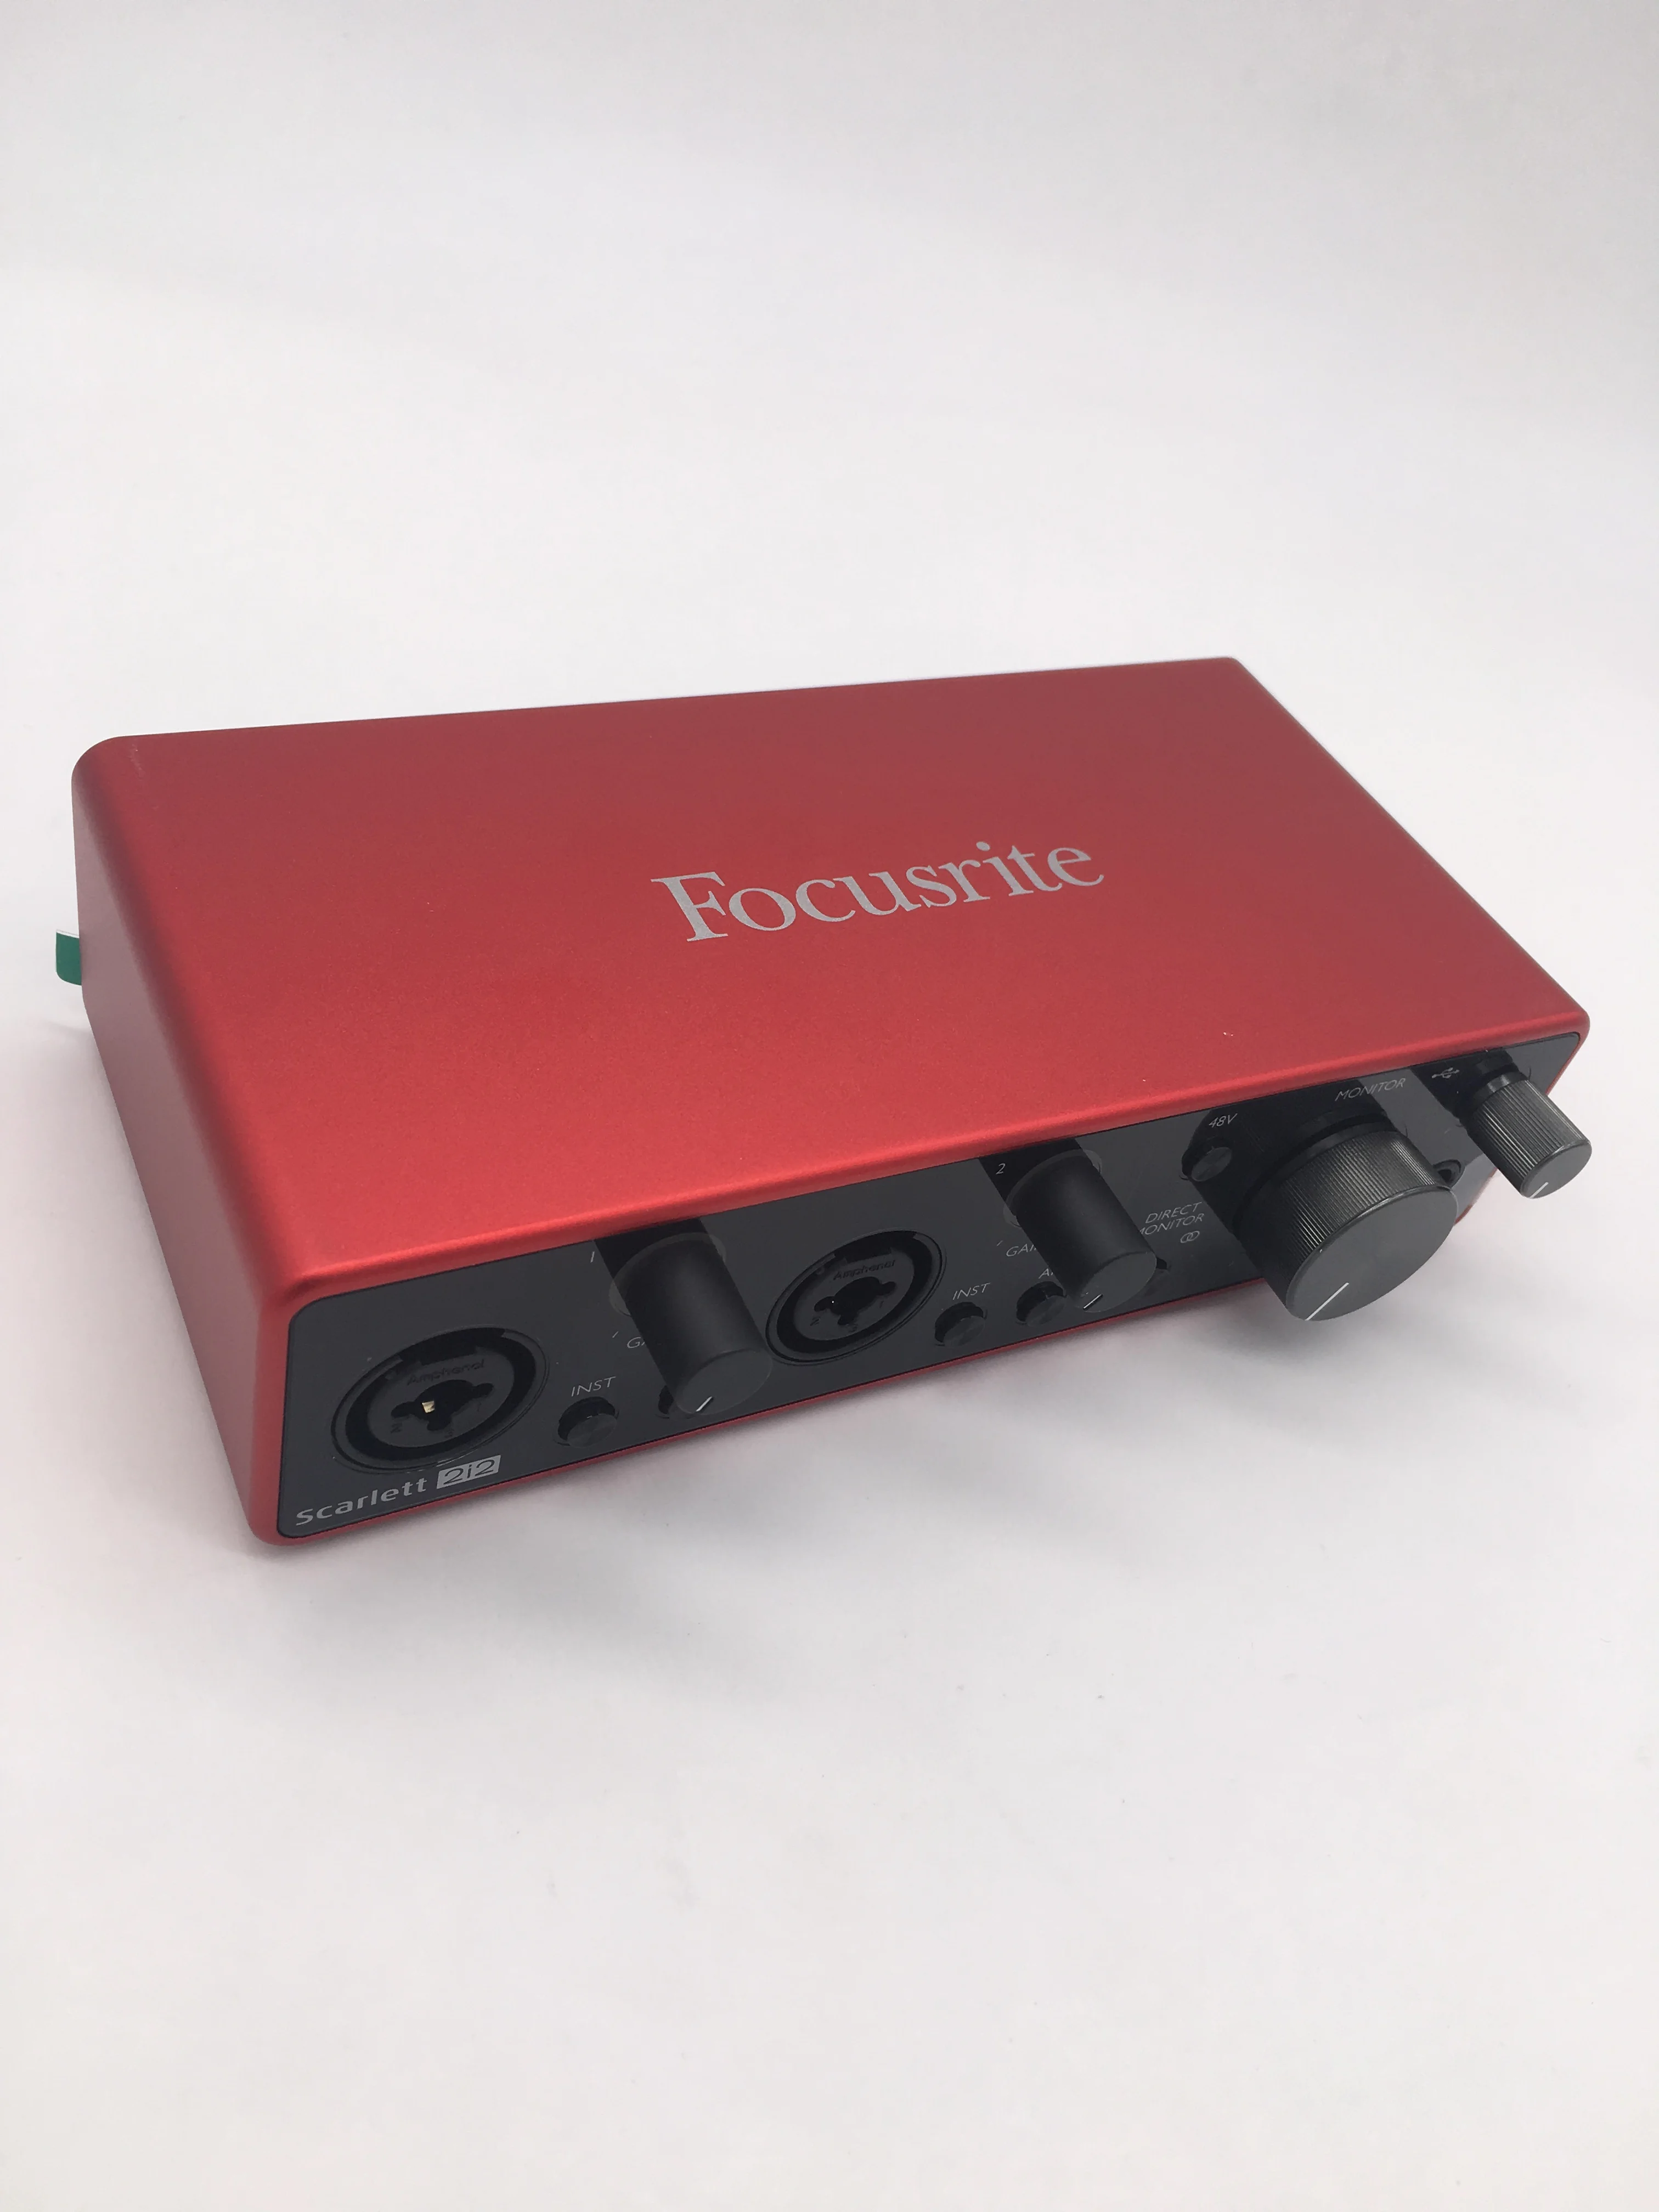 Upgraded New Focusrite Scarlett 2i2 3rd Generation Professional Recording  Sound Card Usb Audio Interface With Mic Preamp - Headphone Amplifier -  AliExpress